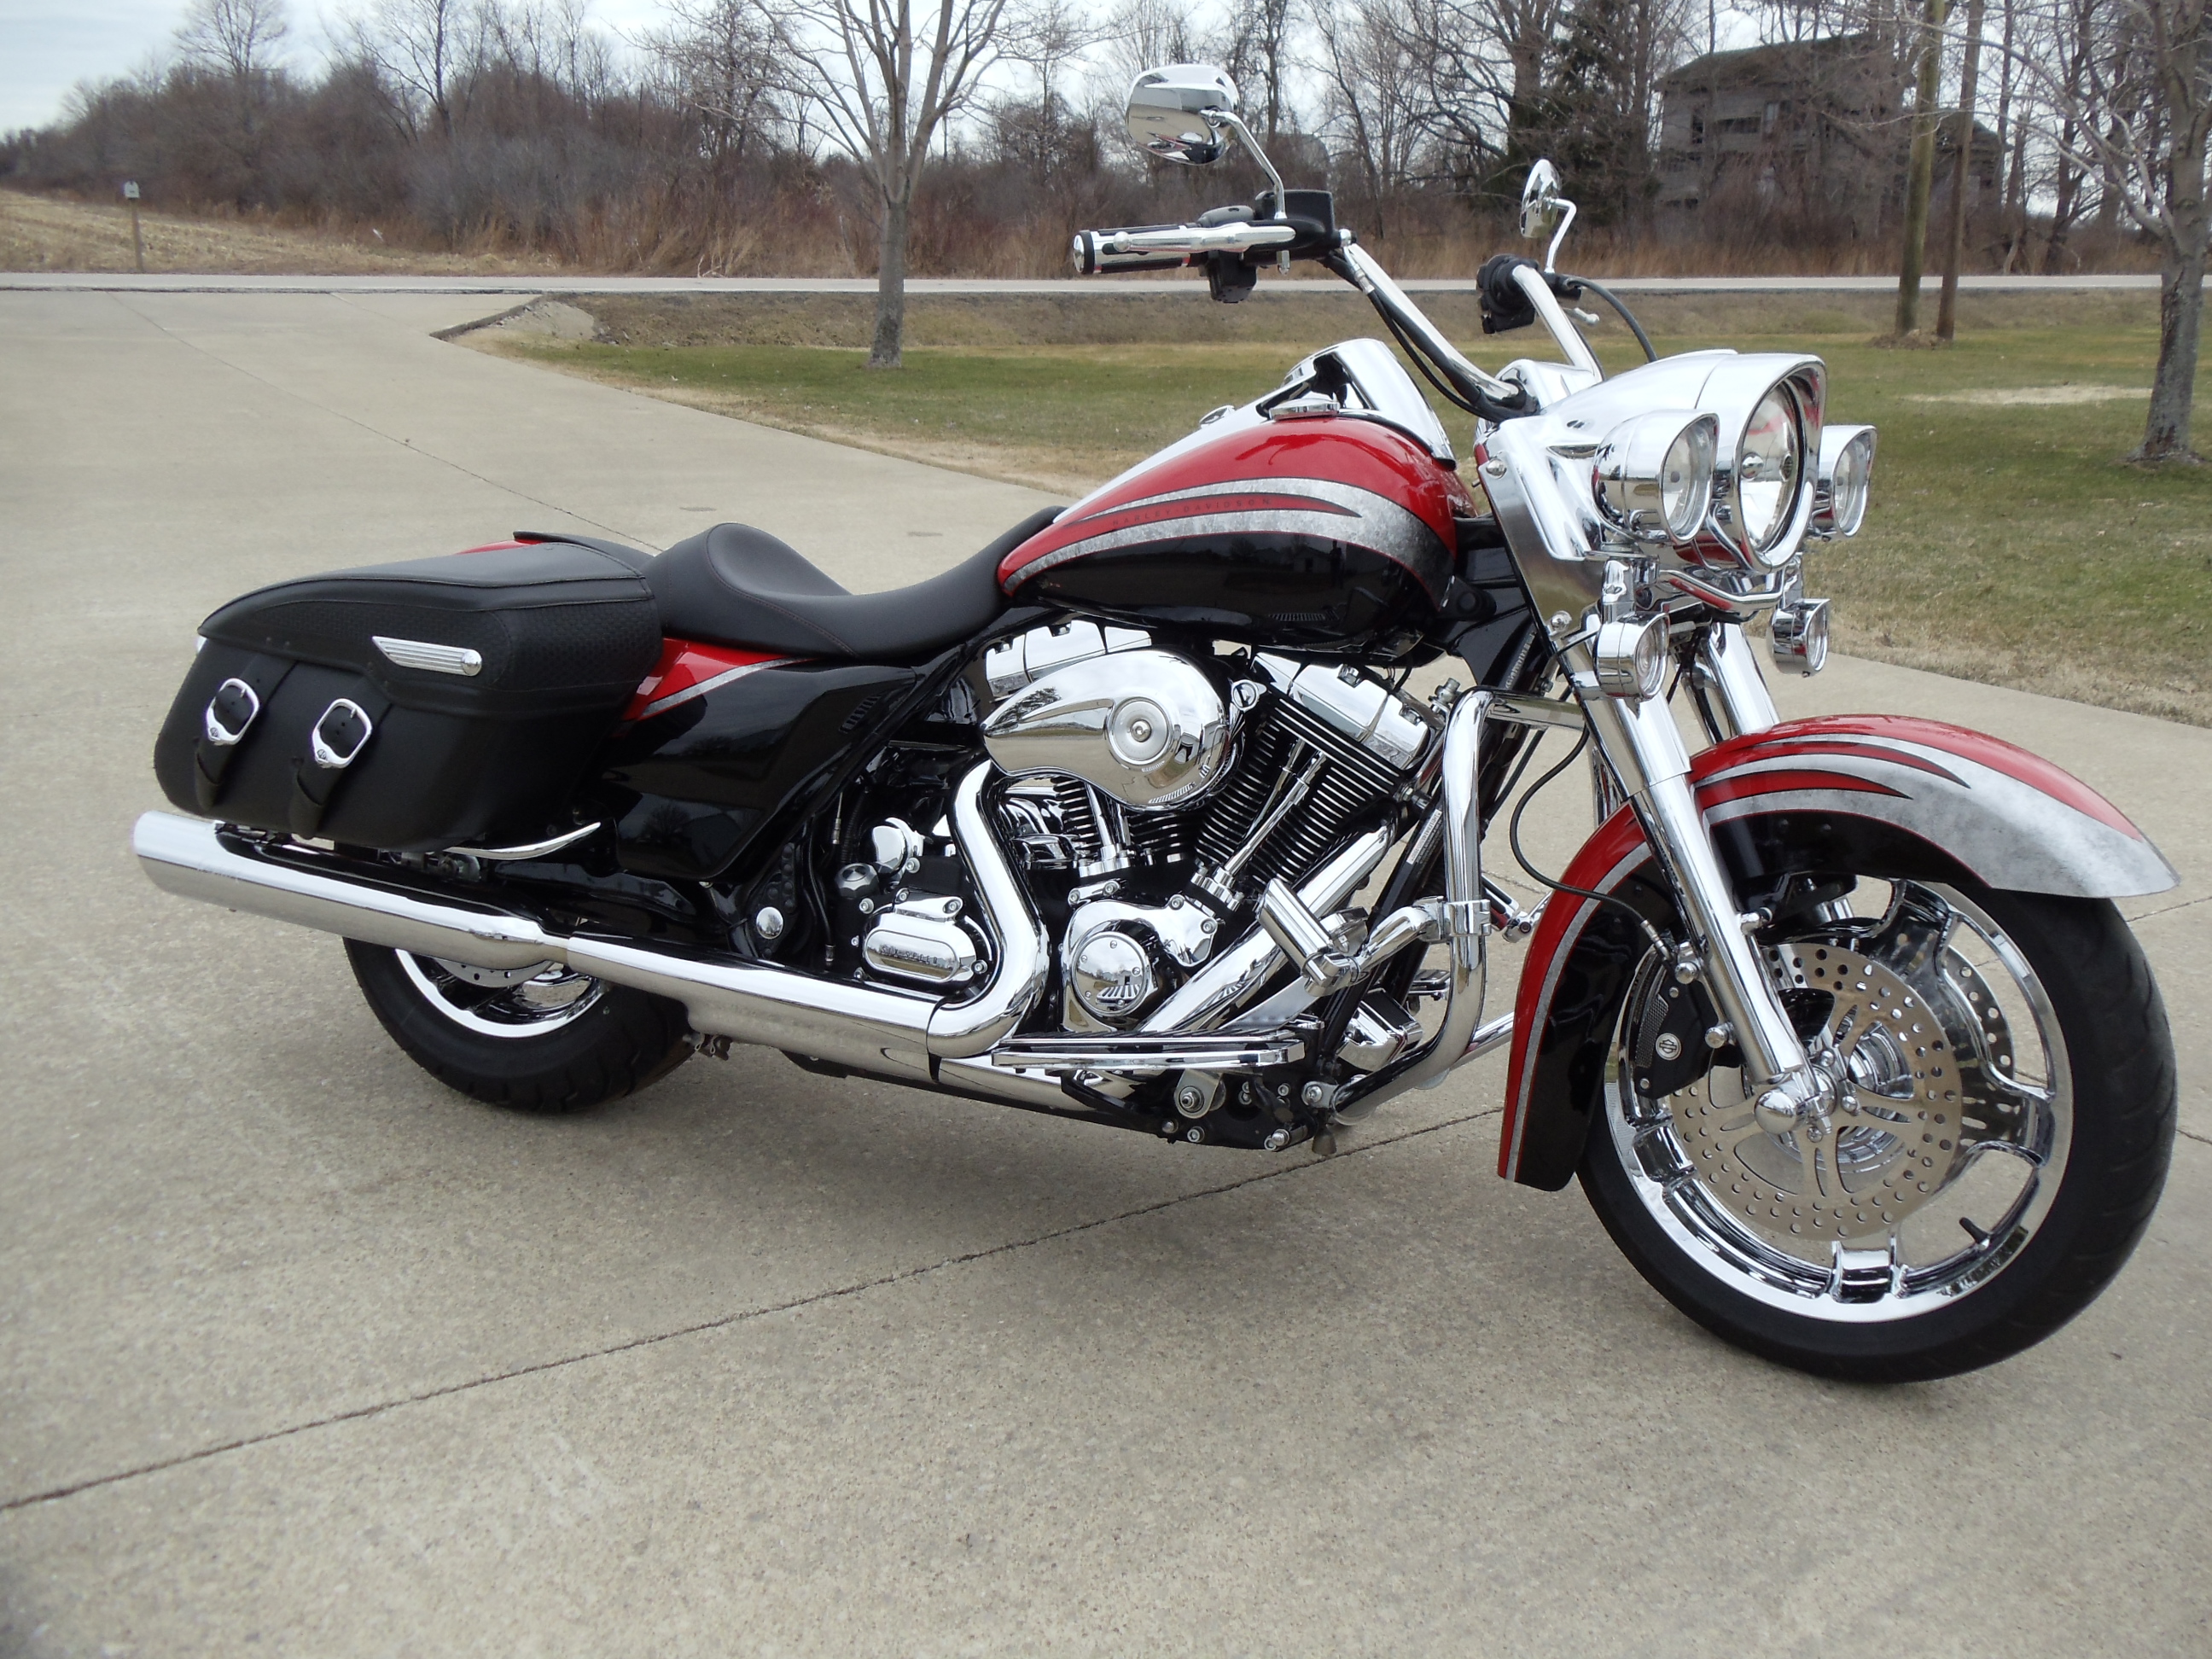 Road King solo bagger pics? - Page 10 - Harley Davidson Forums